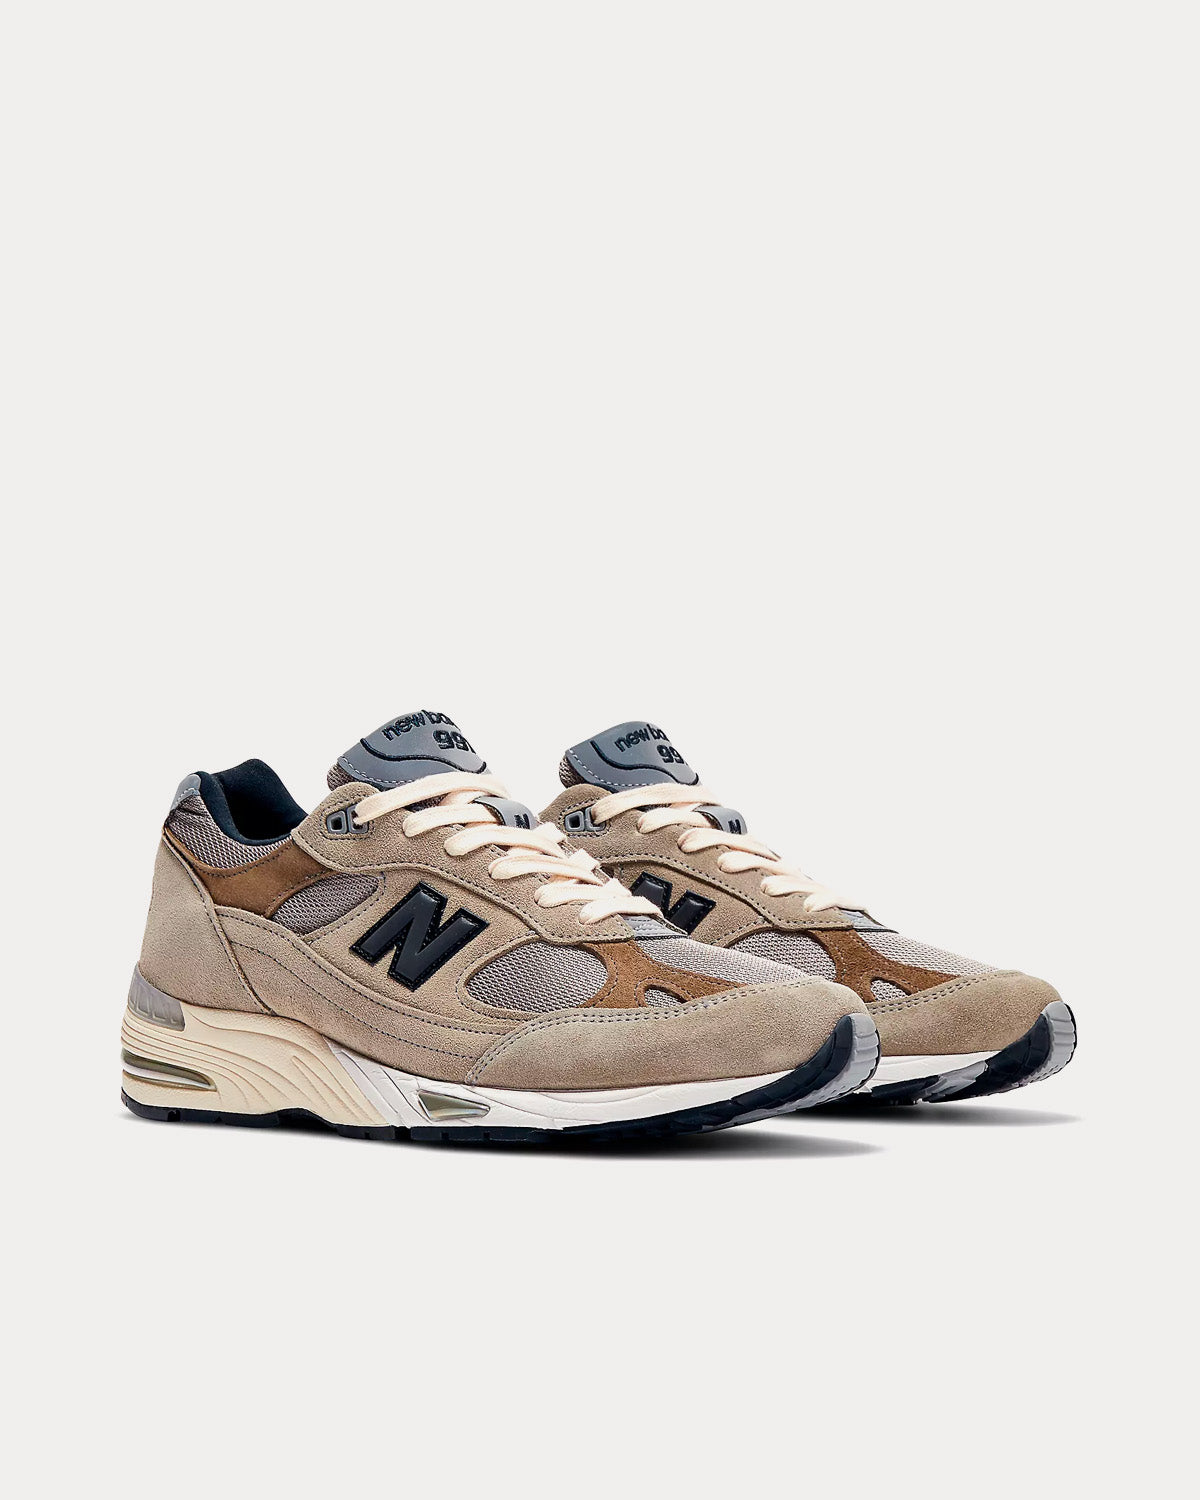 New Balance x Jjjjound - MADE in UK 991 Cobblestone with Covert Green and Black Low Top Sneakers